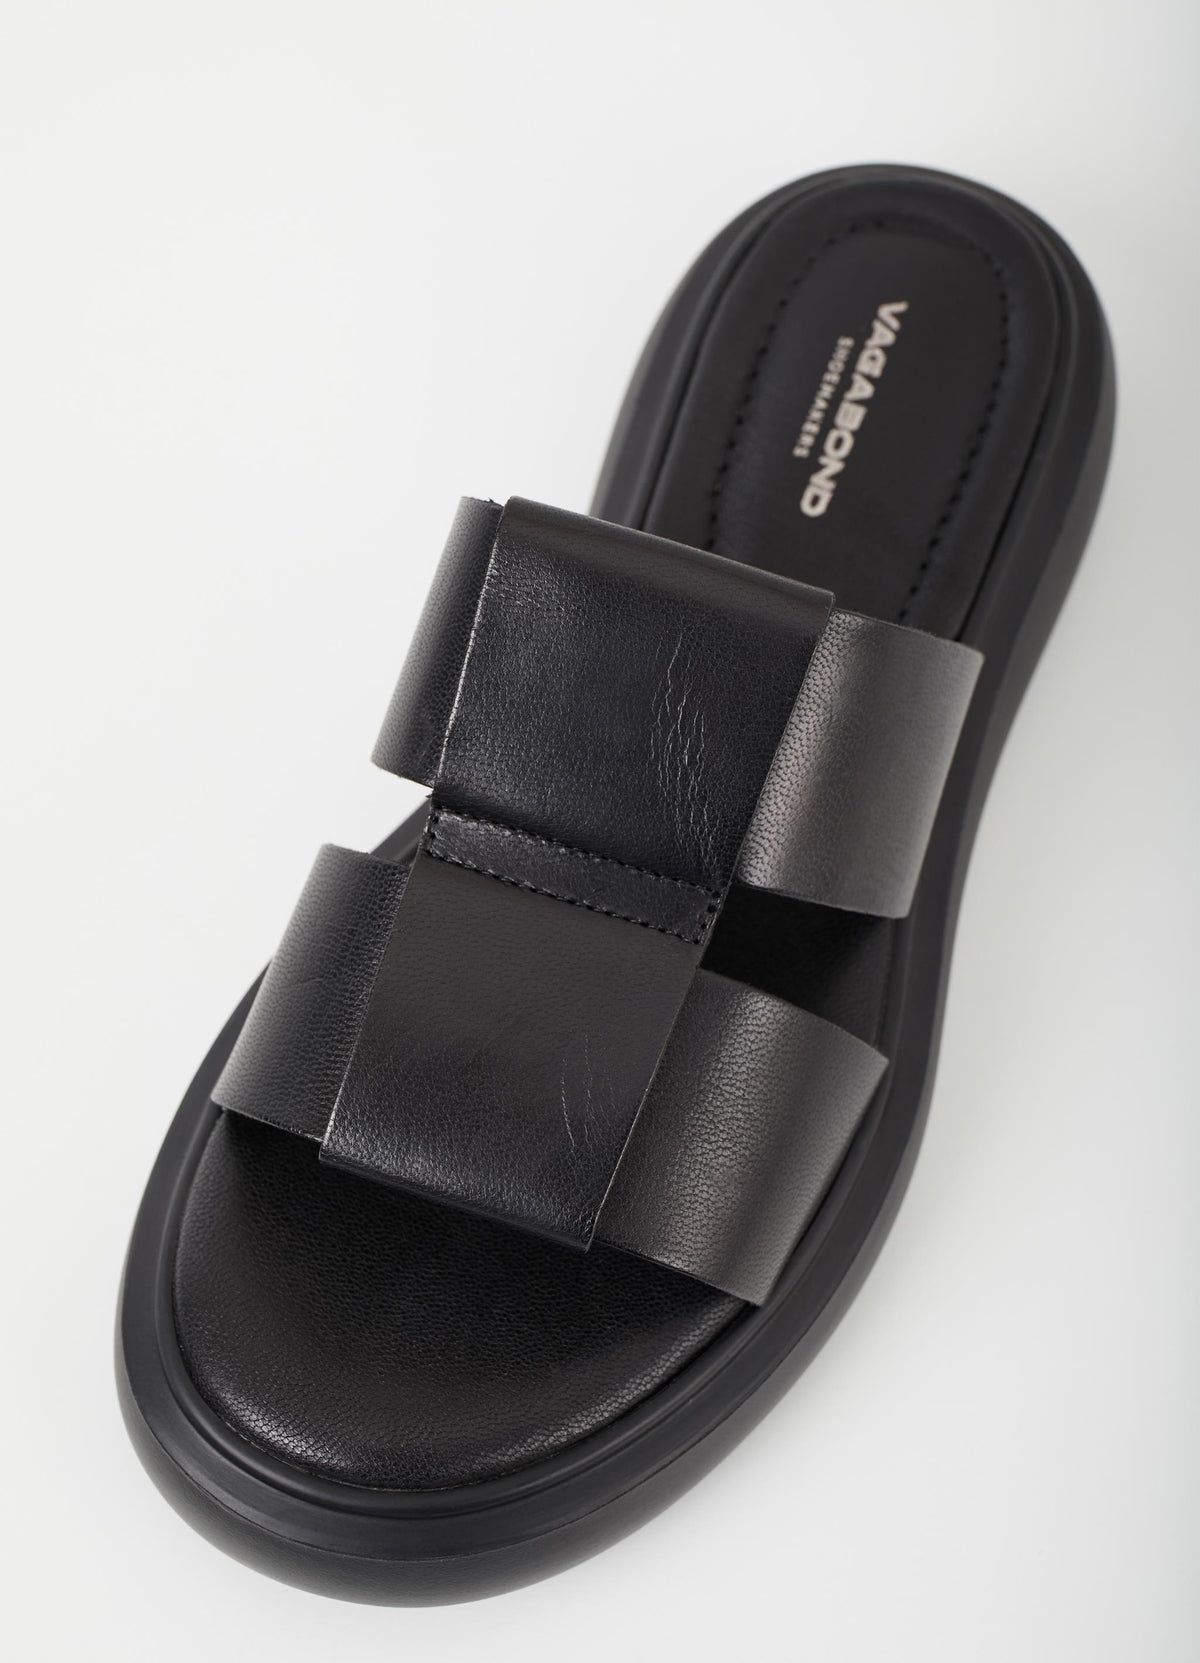 Black leather upper slider style sandal with a chunky black sole